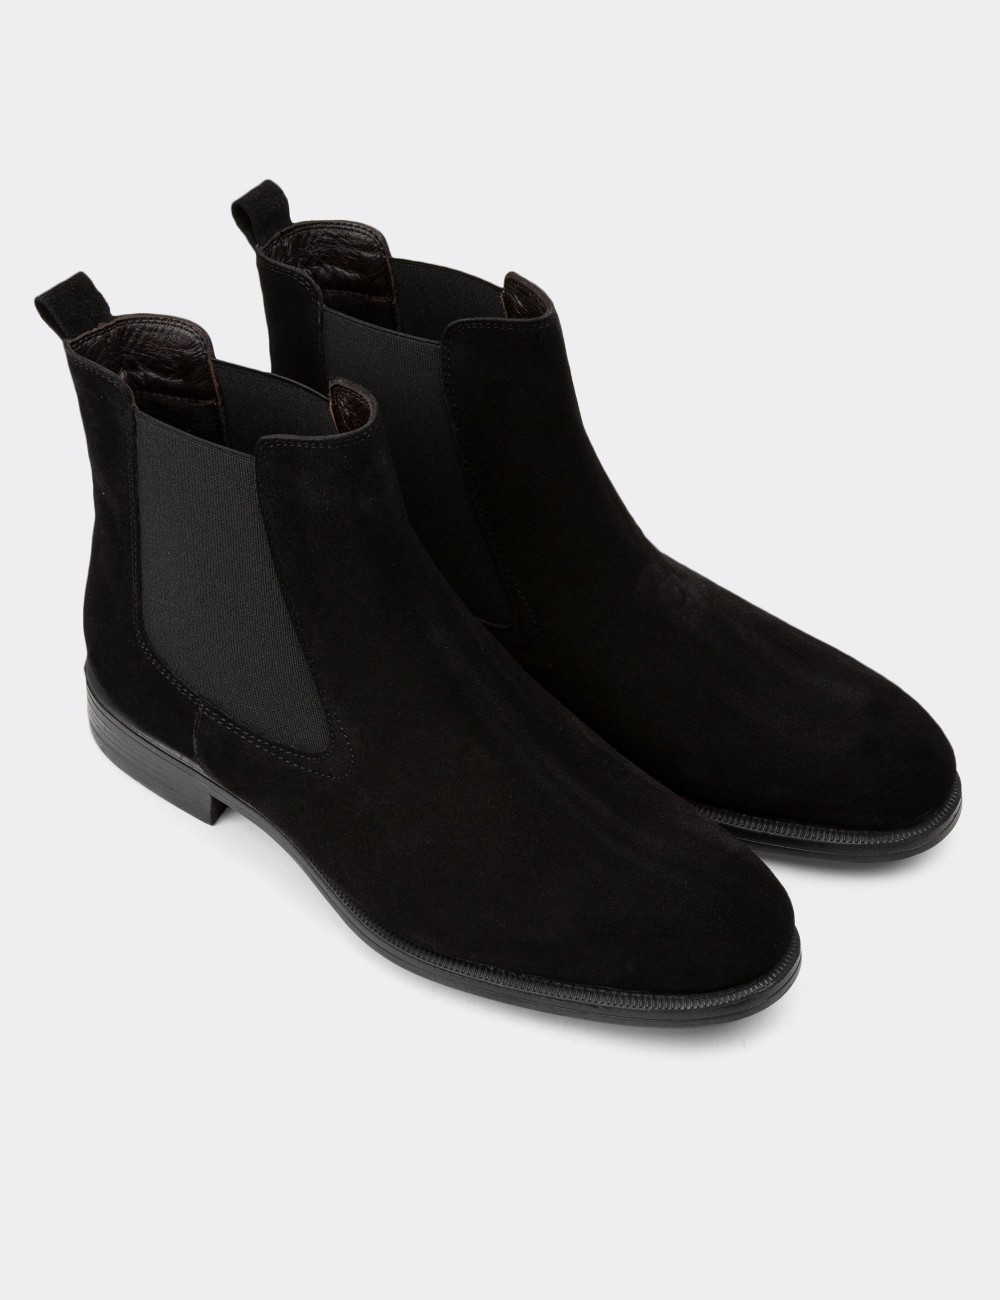 Black Suede Leather Chelsea Boots - 01919MSYHC02